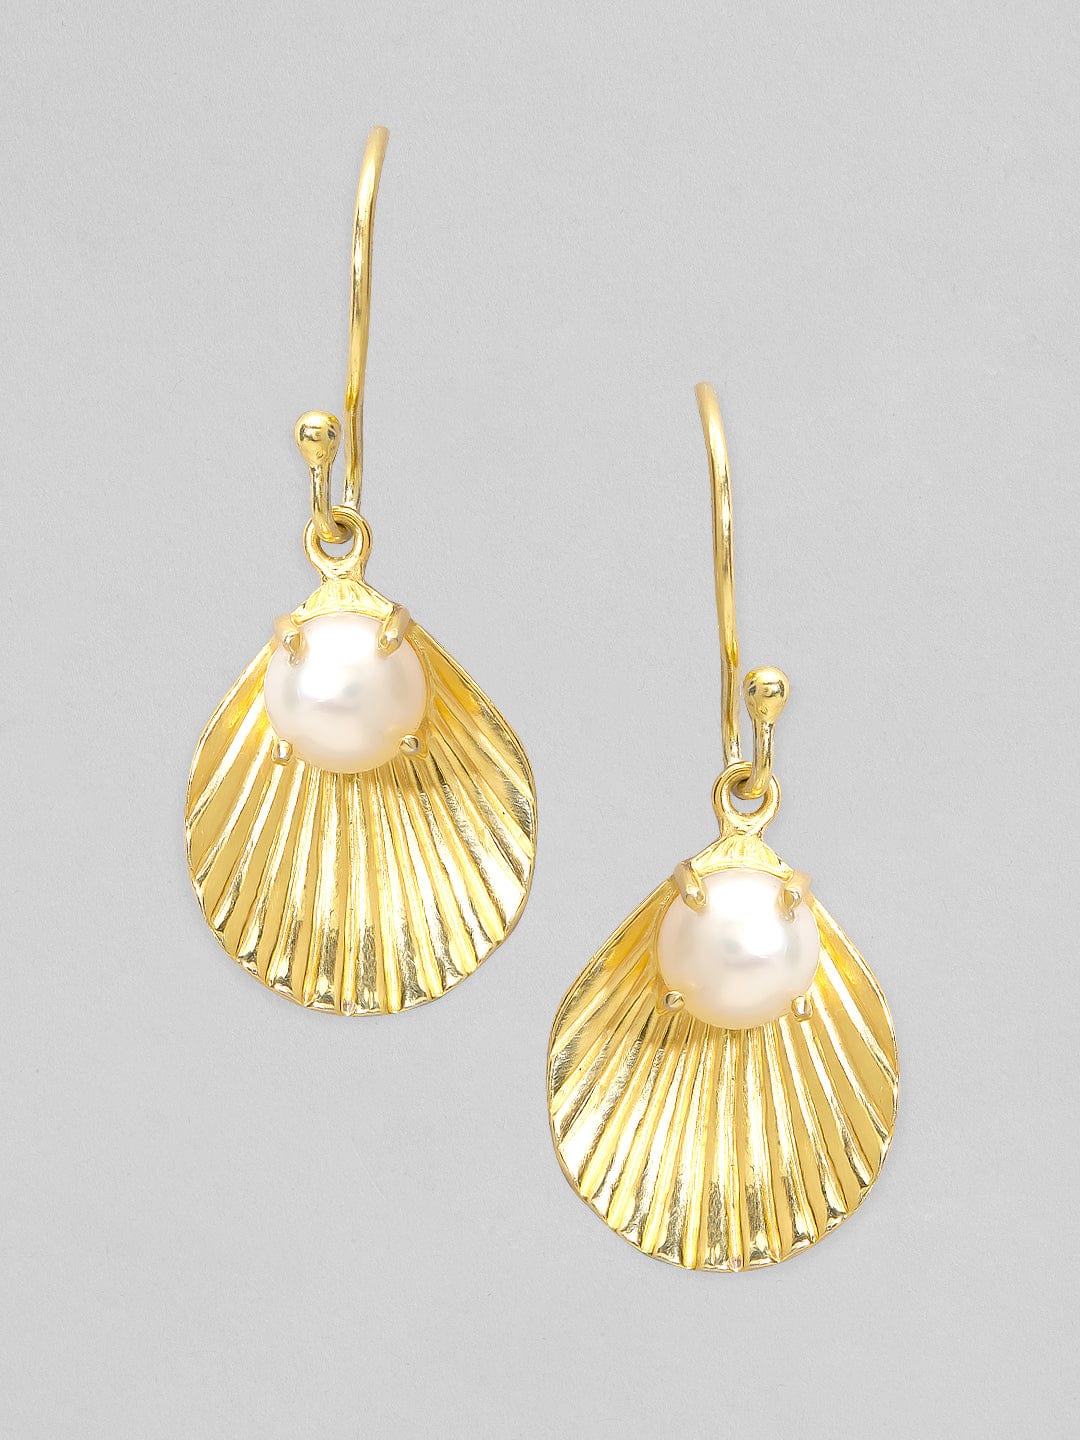 Rubans 925 Silver Shells And Fresh Water Pearls Drop Earrings.- Gold Plated Earrings